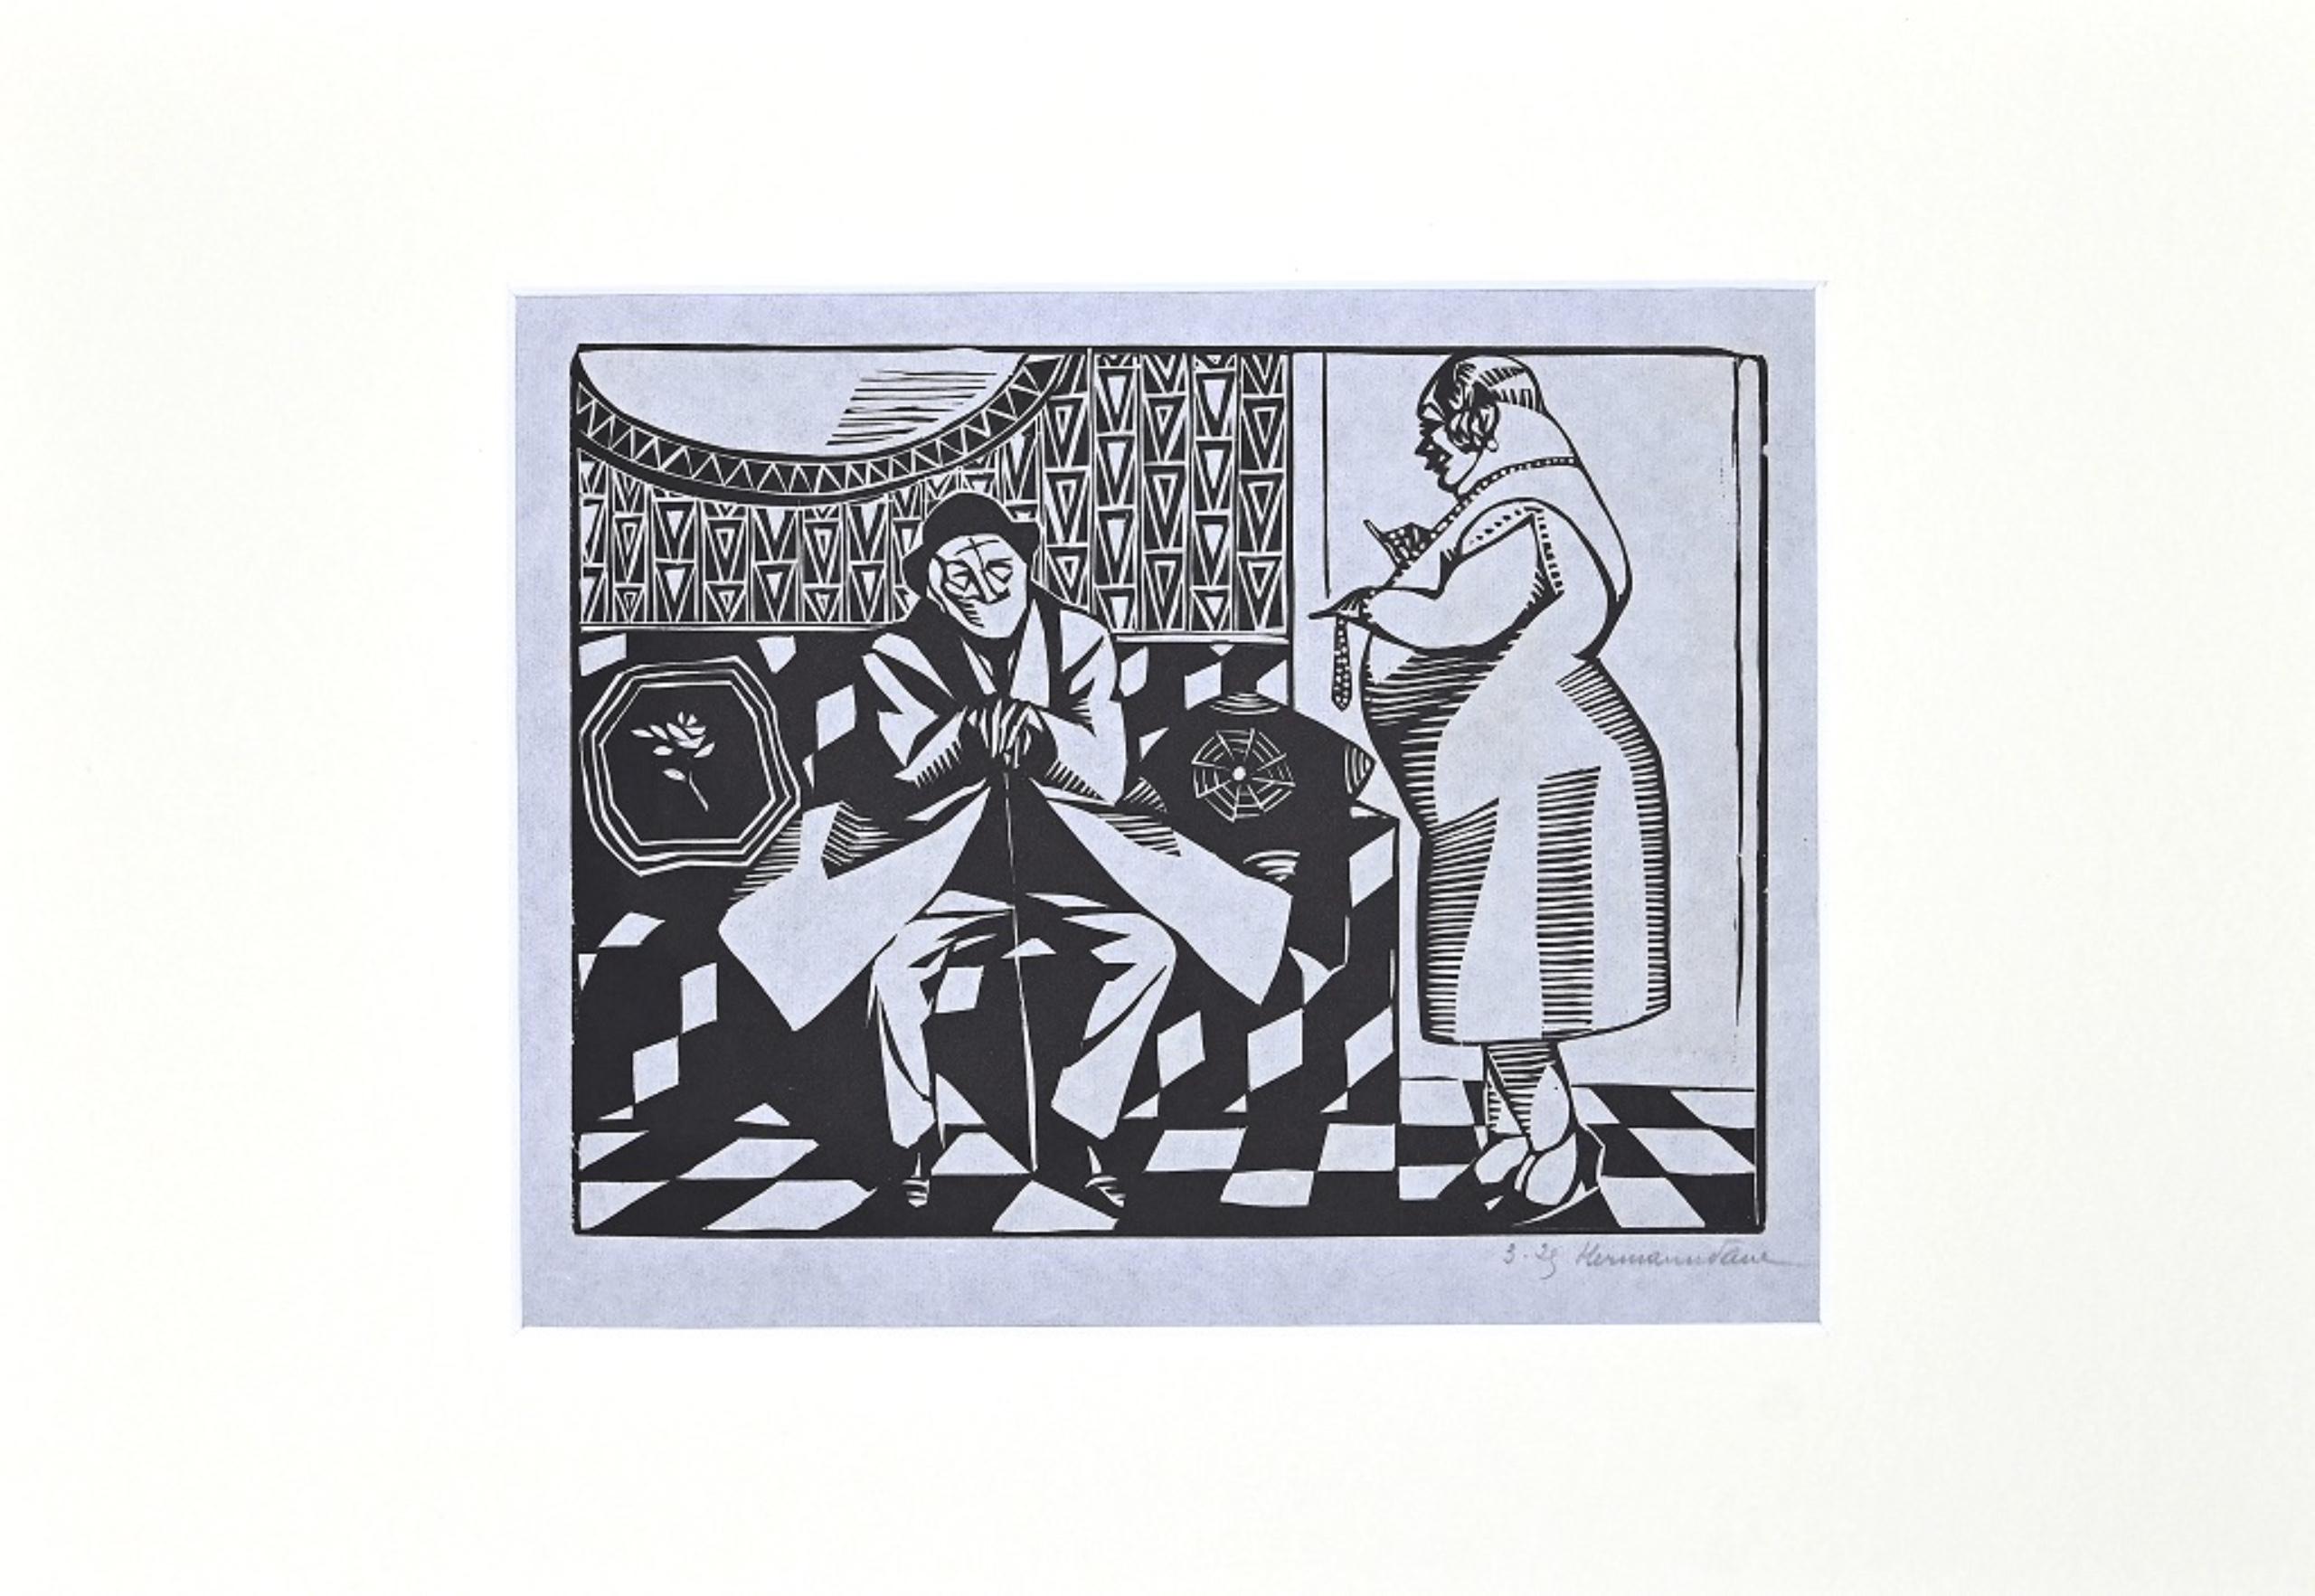 The Wait is an original Modern artwork realized by Hermann-Paul (Paris,1864 – 1940).

Original Woodcut on paper. 

Hand-signed in pencil on the lower right corner.

Passepartout is included; dimensions: 34 x 49 cm.  Image Dimensions: 18 x 24